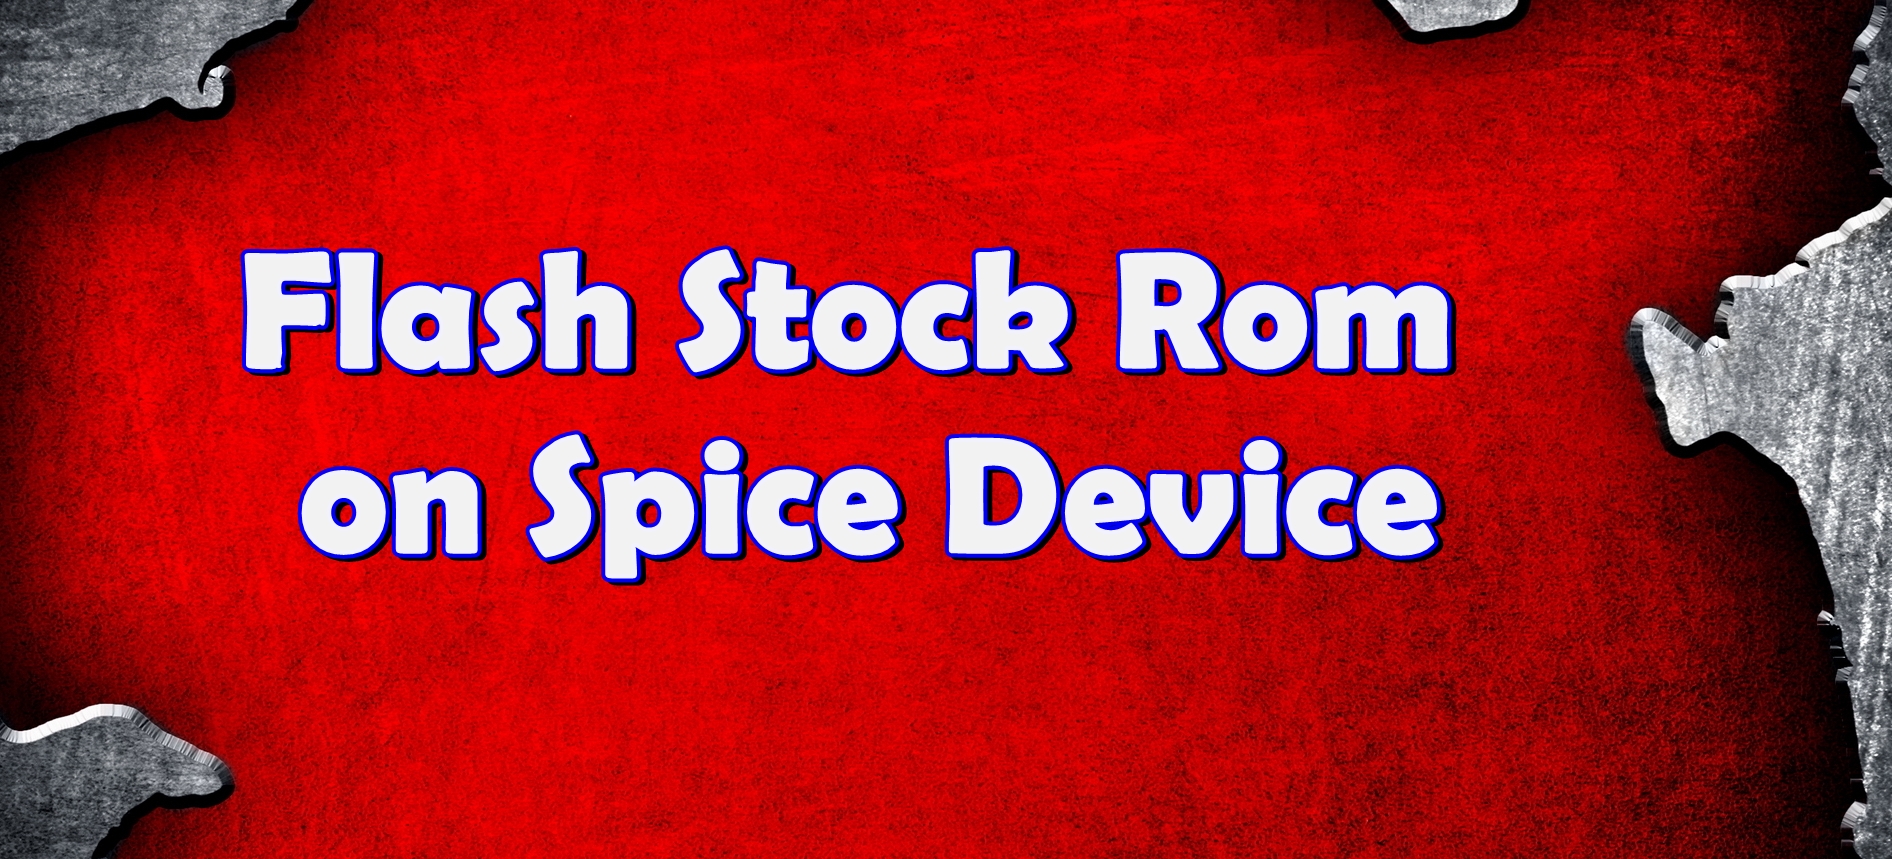 Flash Stock Rom on Spice